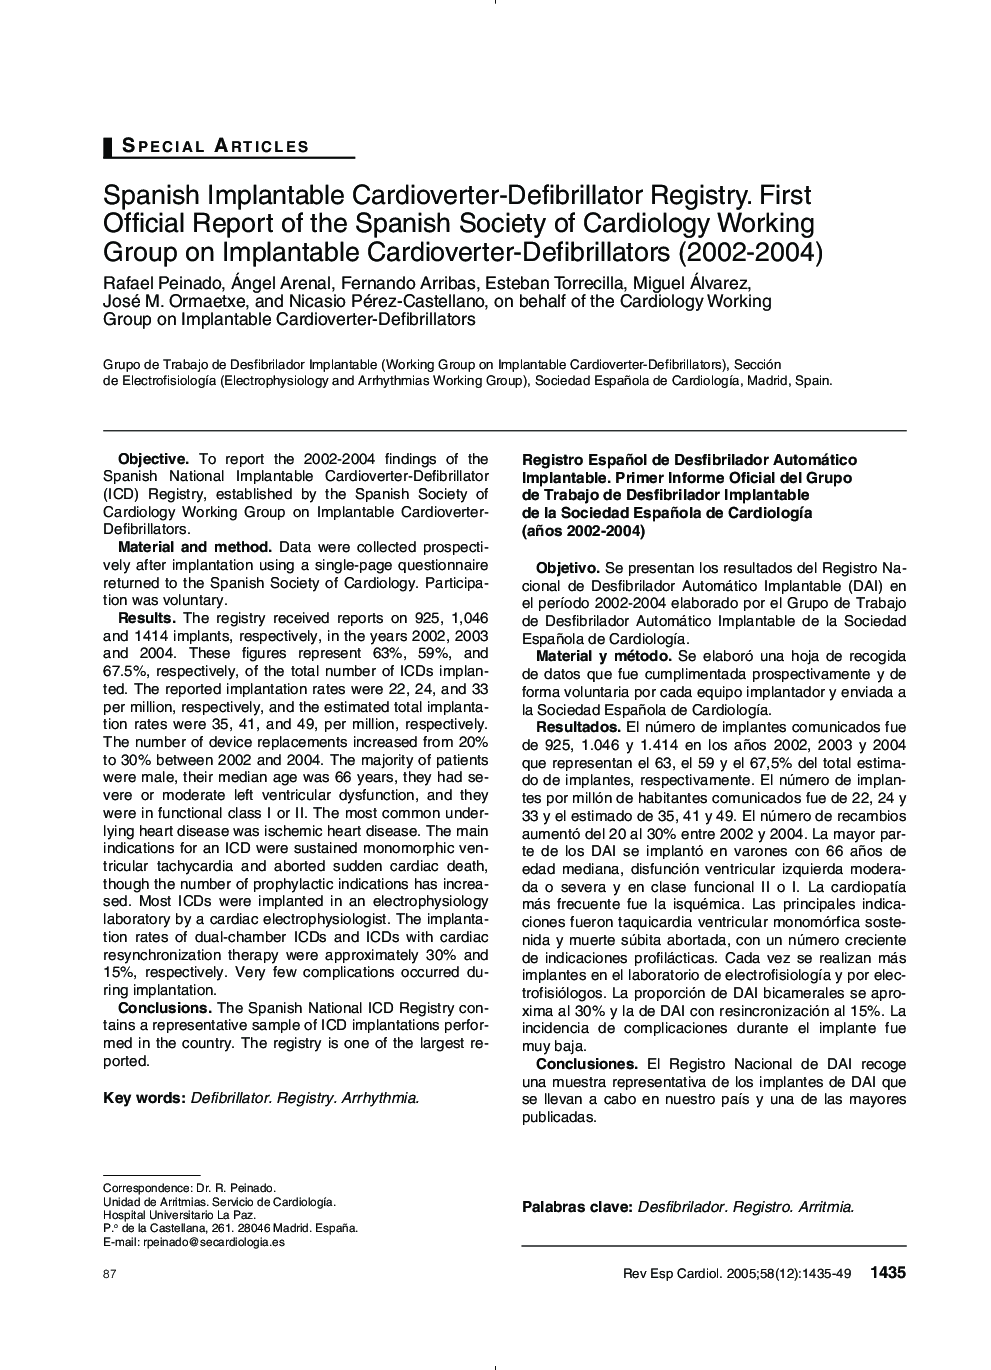 Spanish Implantable Cardioverter-Defibrillator Registry. First Official Report of the Spanish Society of Cardiology Working Group on Implantable Cardioverter-Defibrillators (2002-2004)